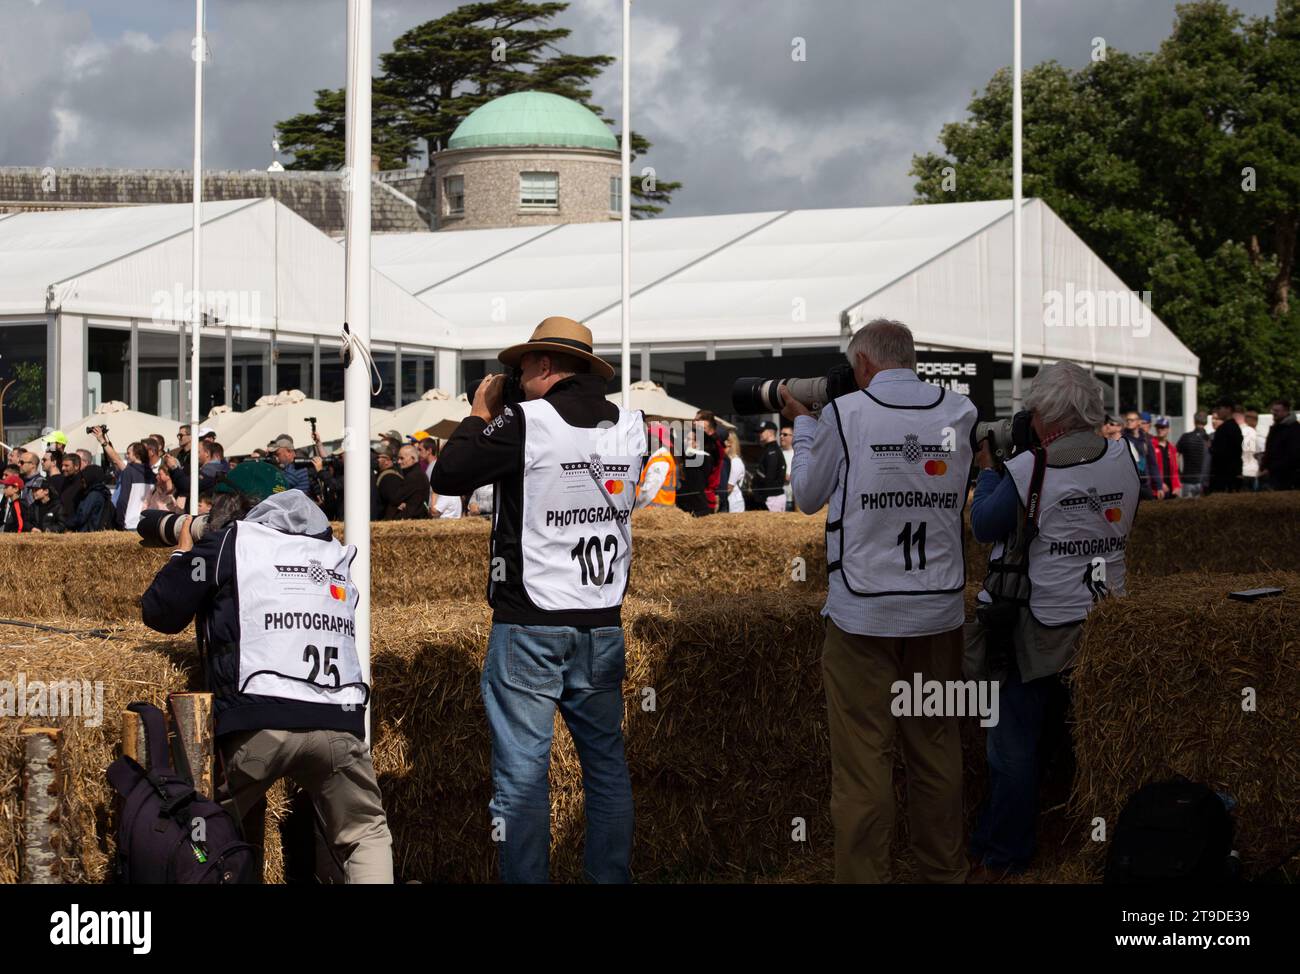 Official photographers taking pictures Goodwood festival of speed Stock Photo